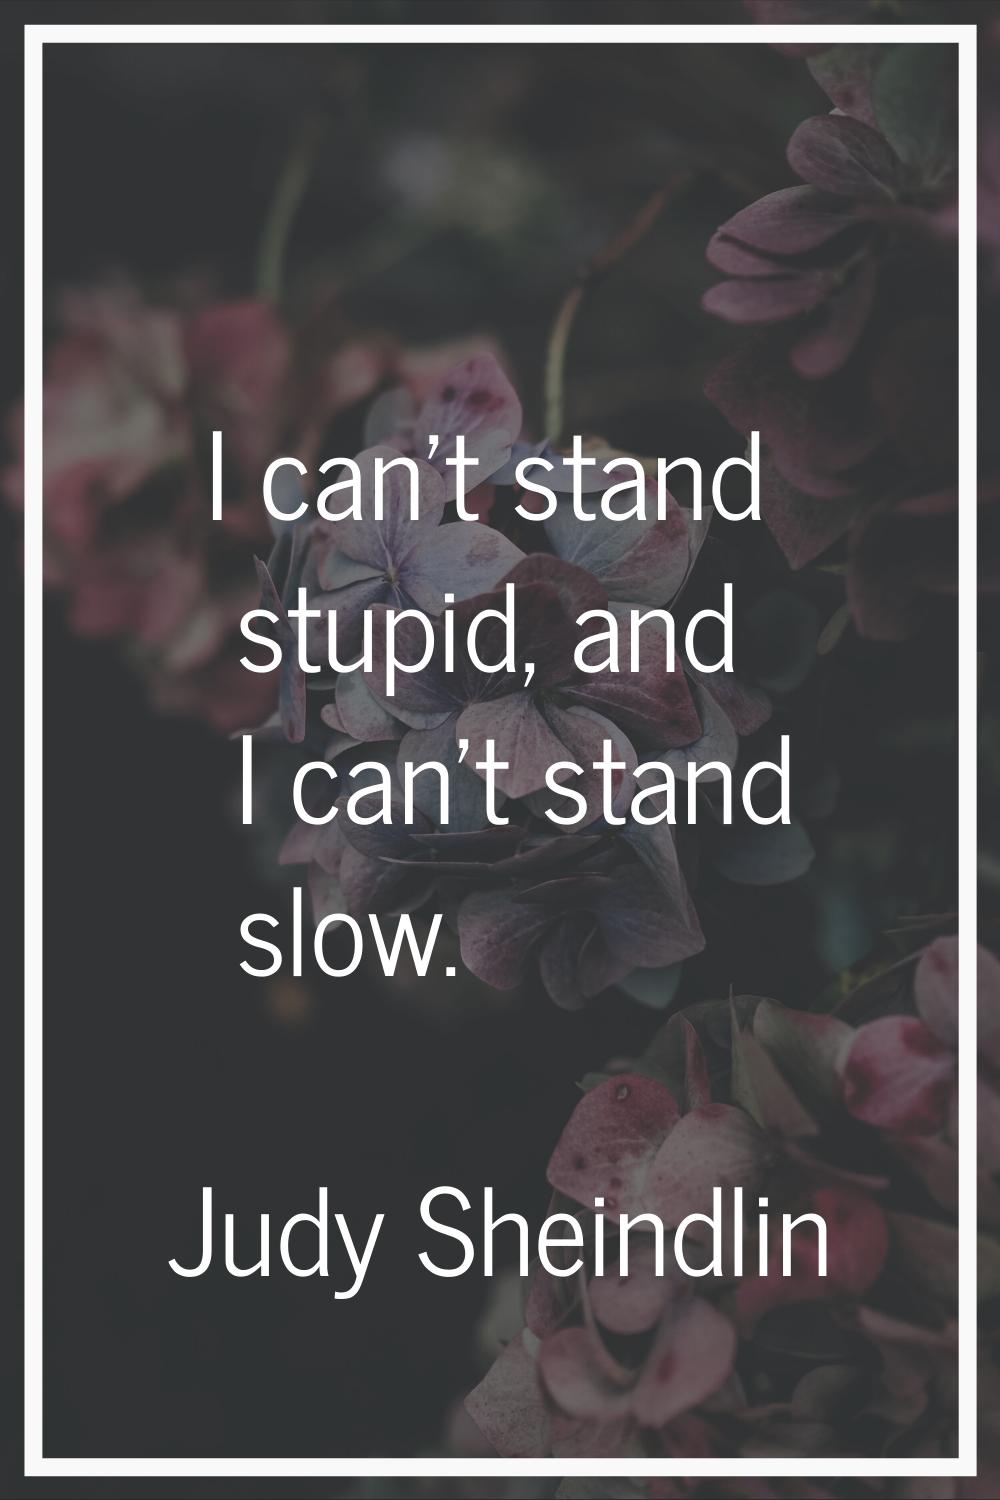 I can't stand stupid, and I can't stand slow.